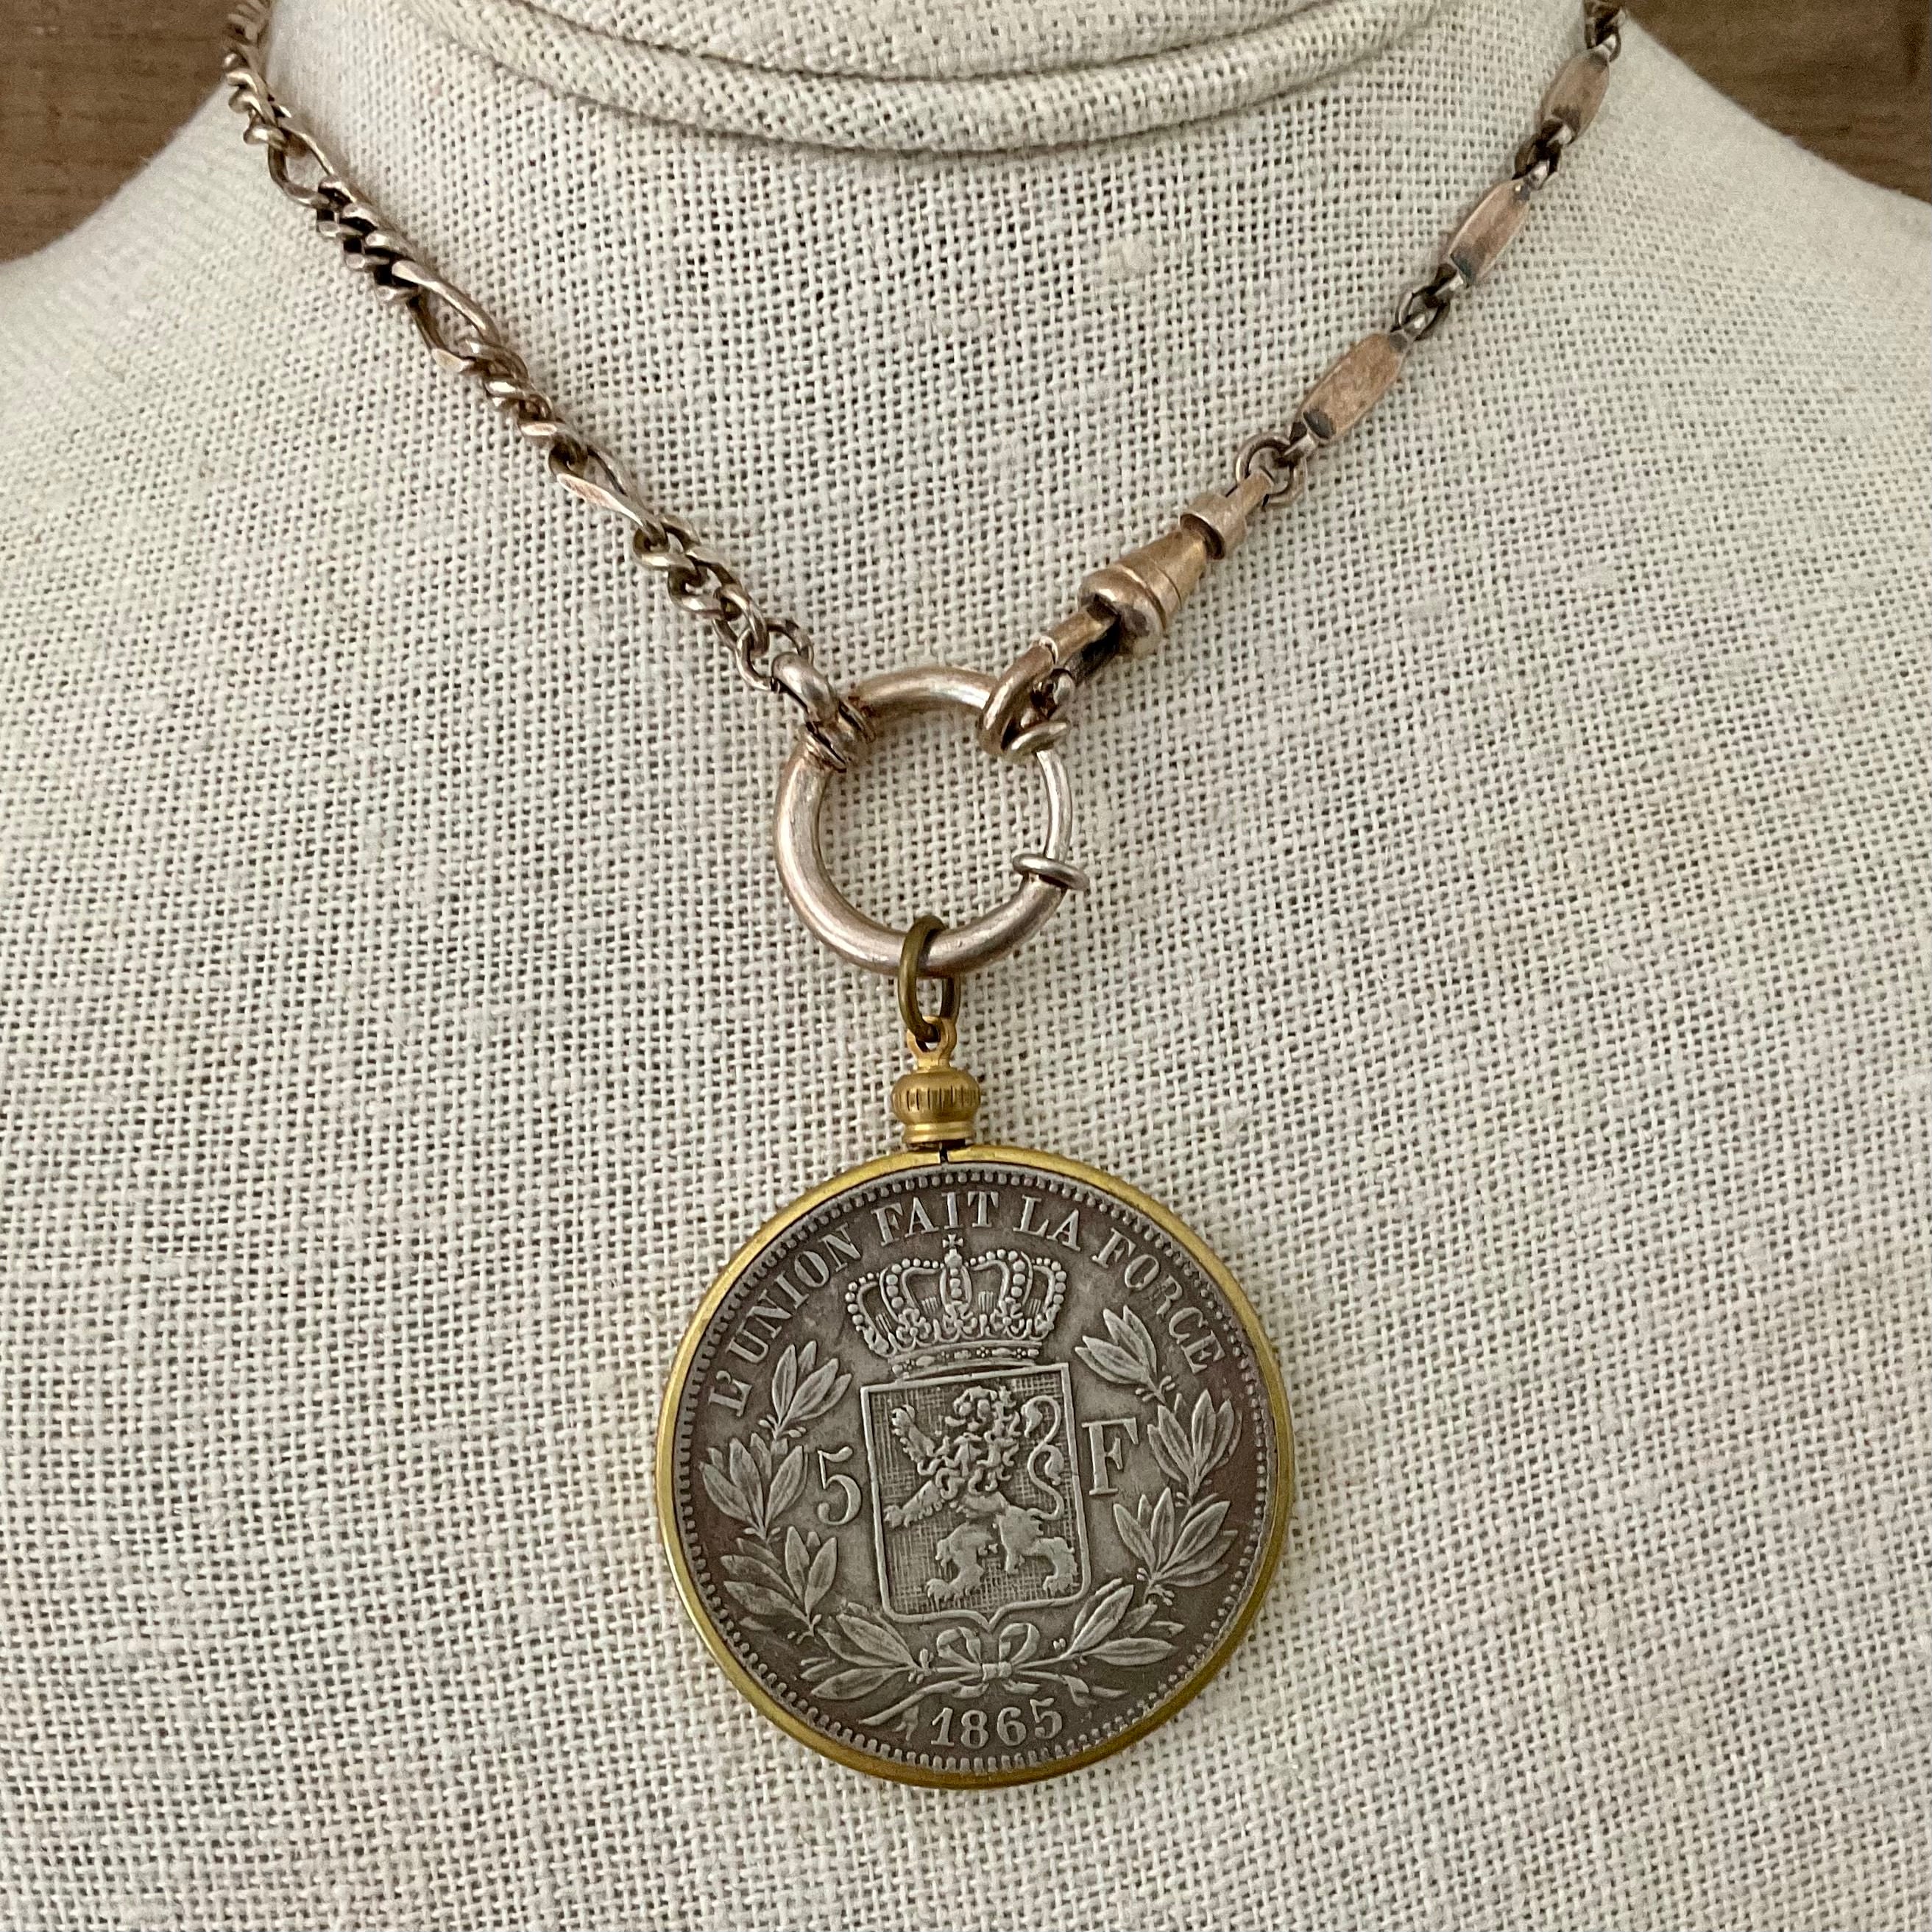 Vintage Sterling Watch Chain with Belgian Coin Circa 1865